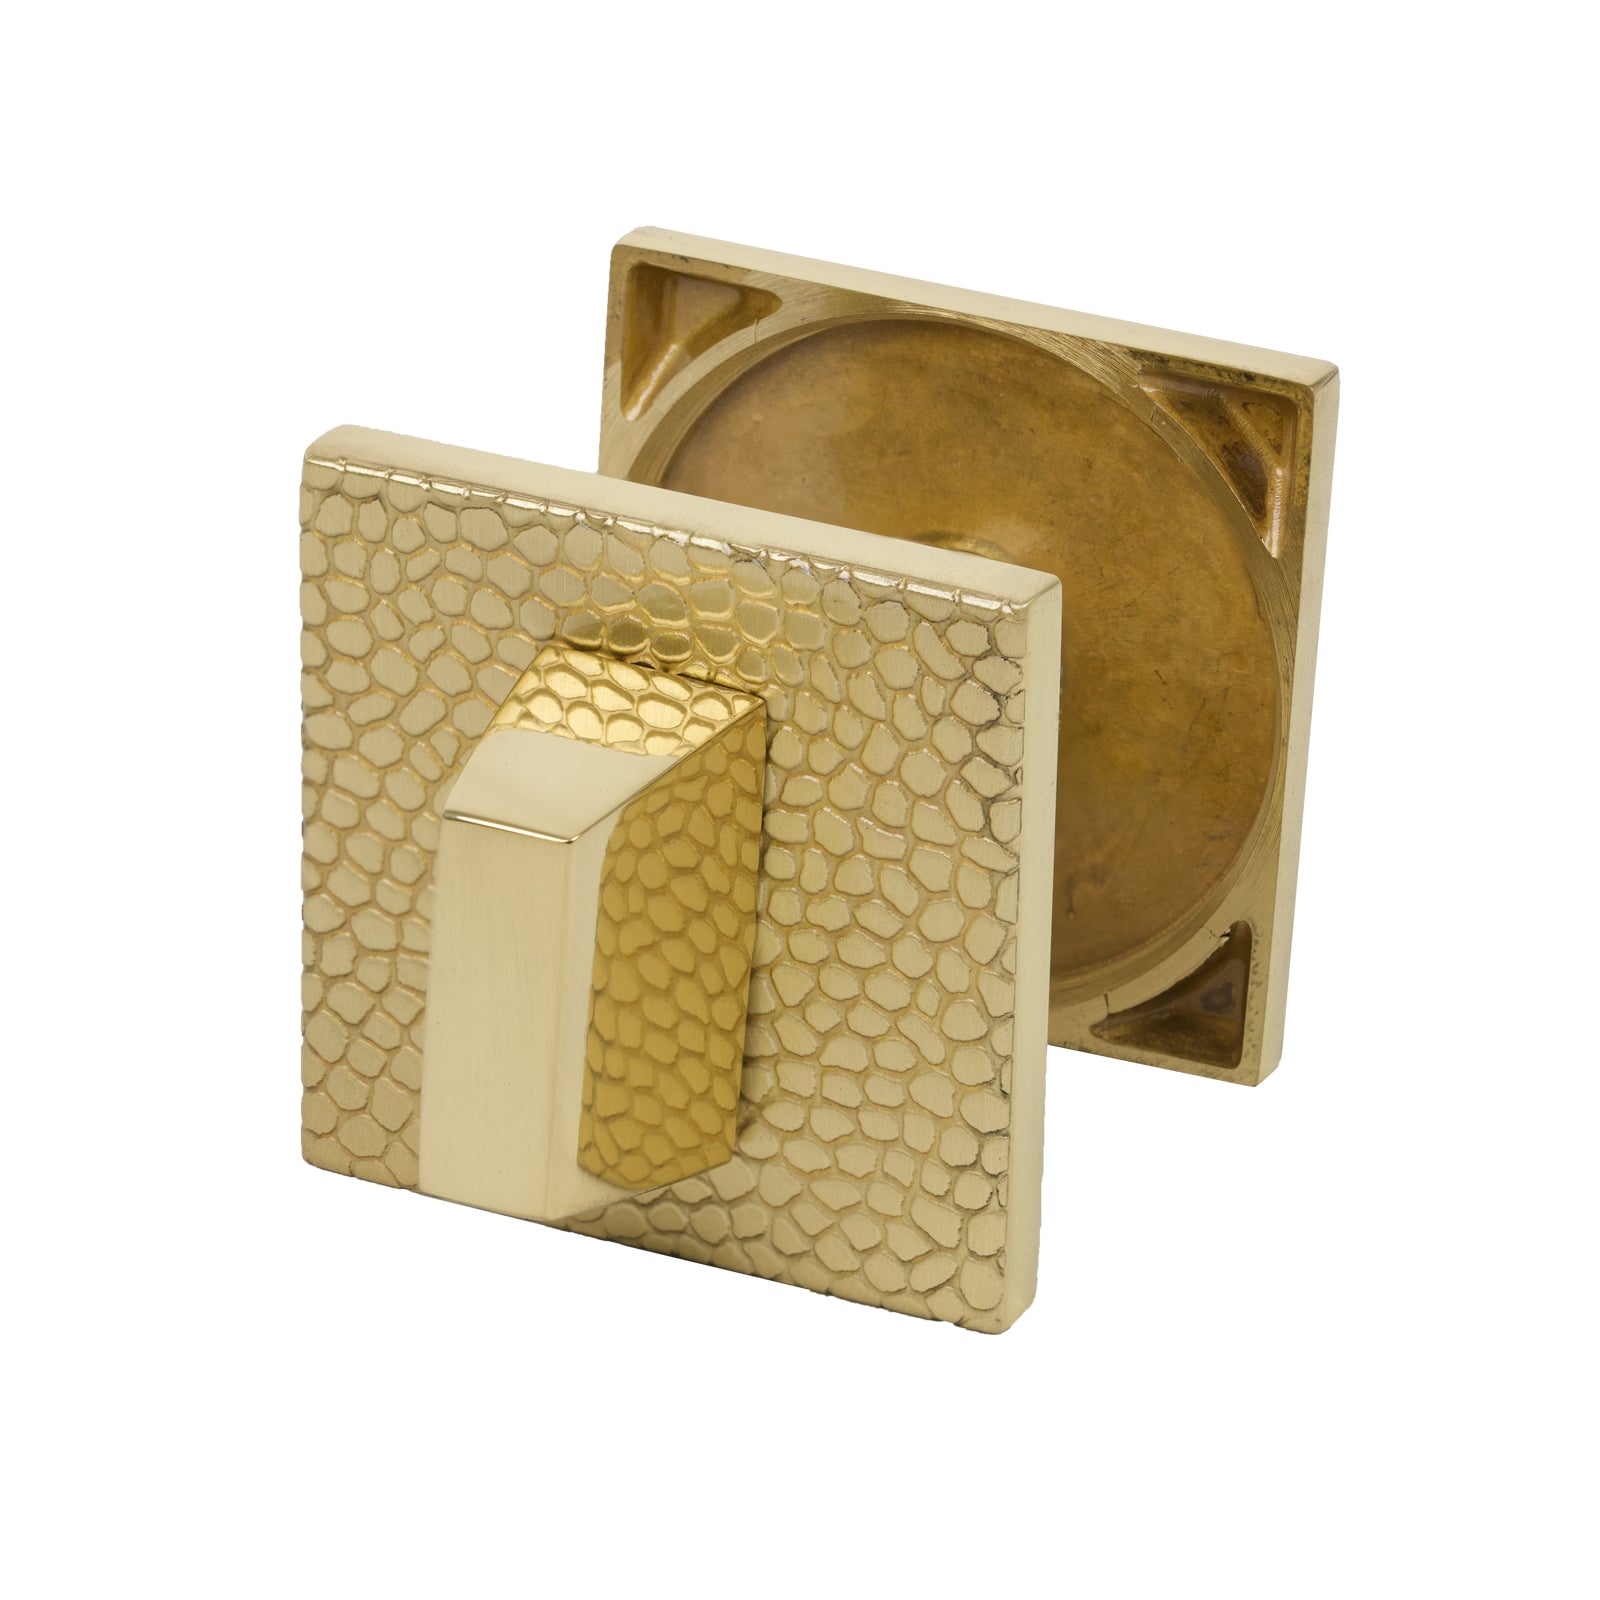 Tupai Pebbles bathroom turn and release in Polished/Satin Brass Finish SHOW